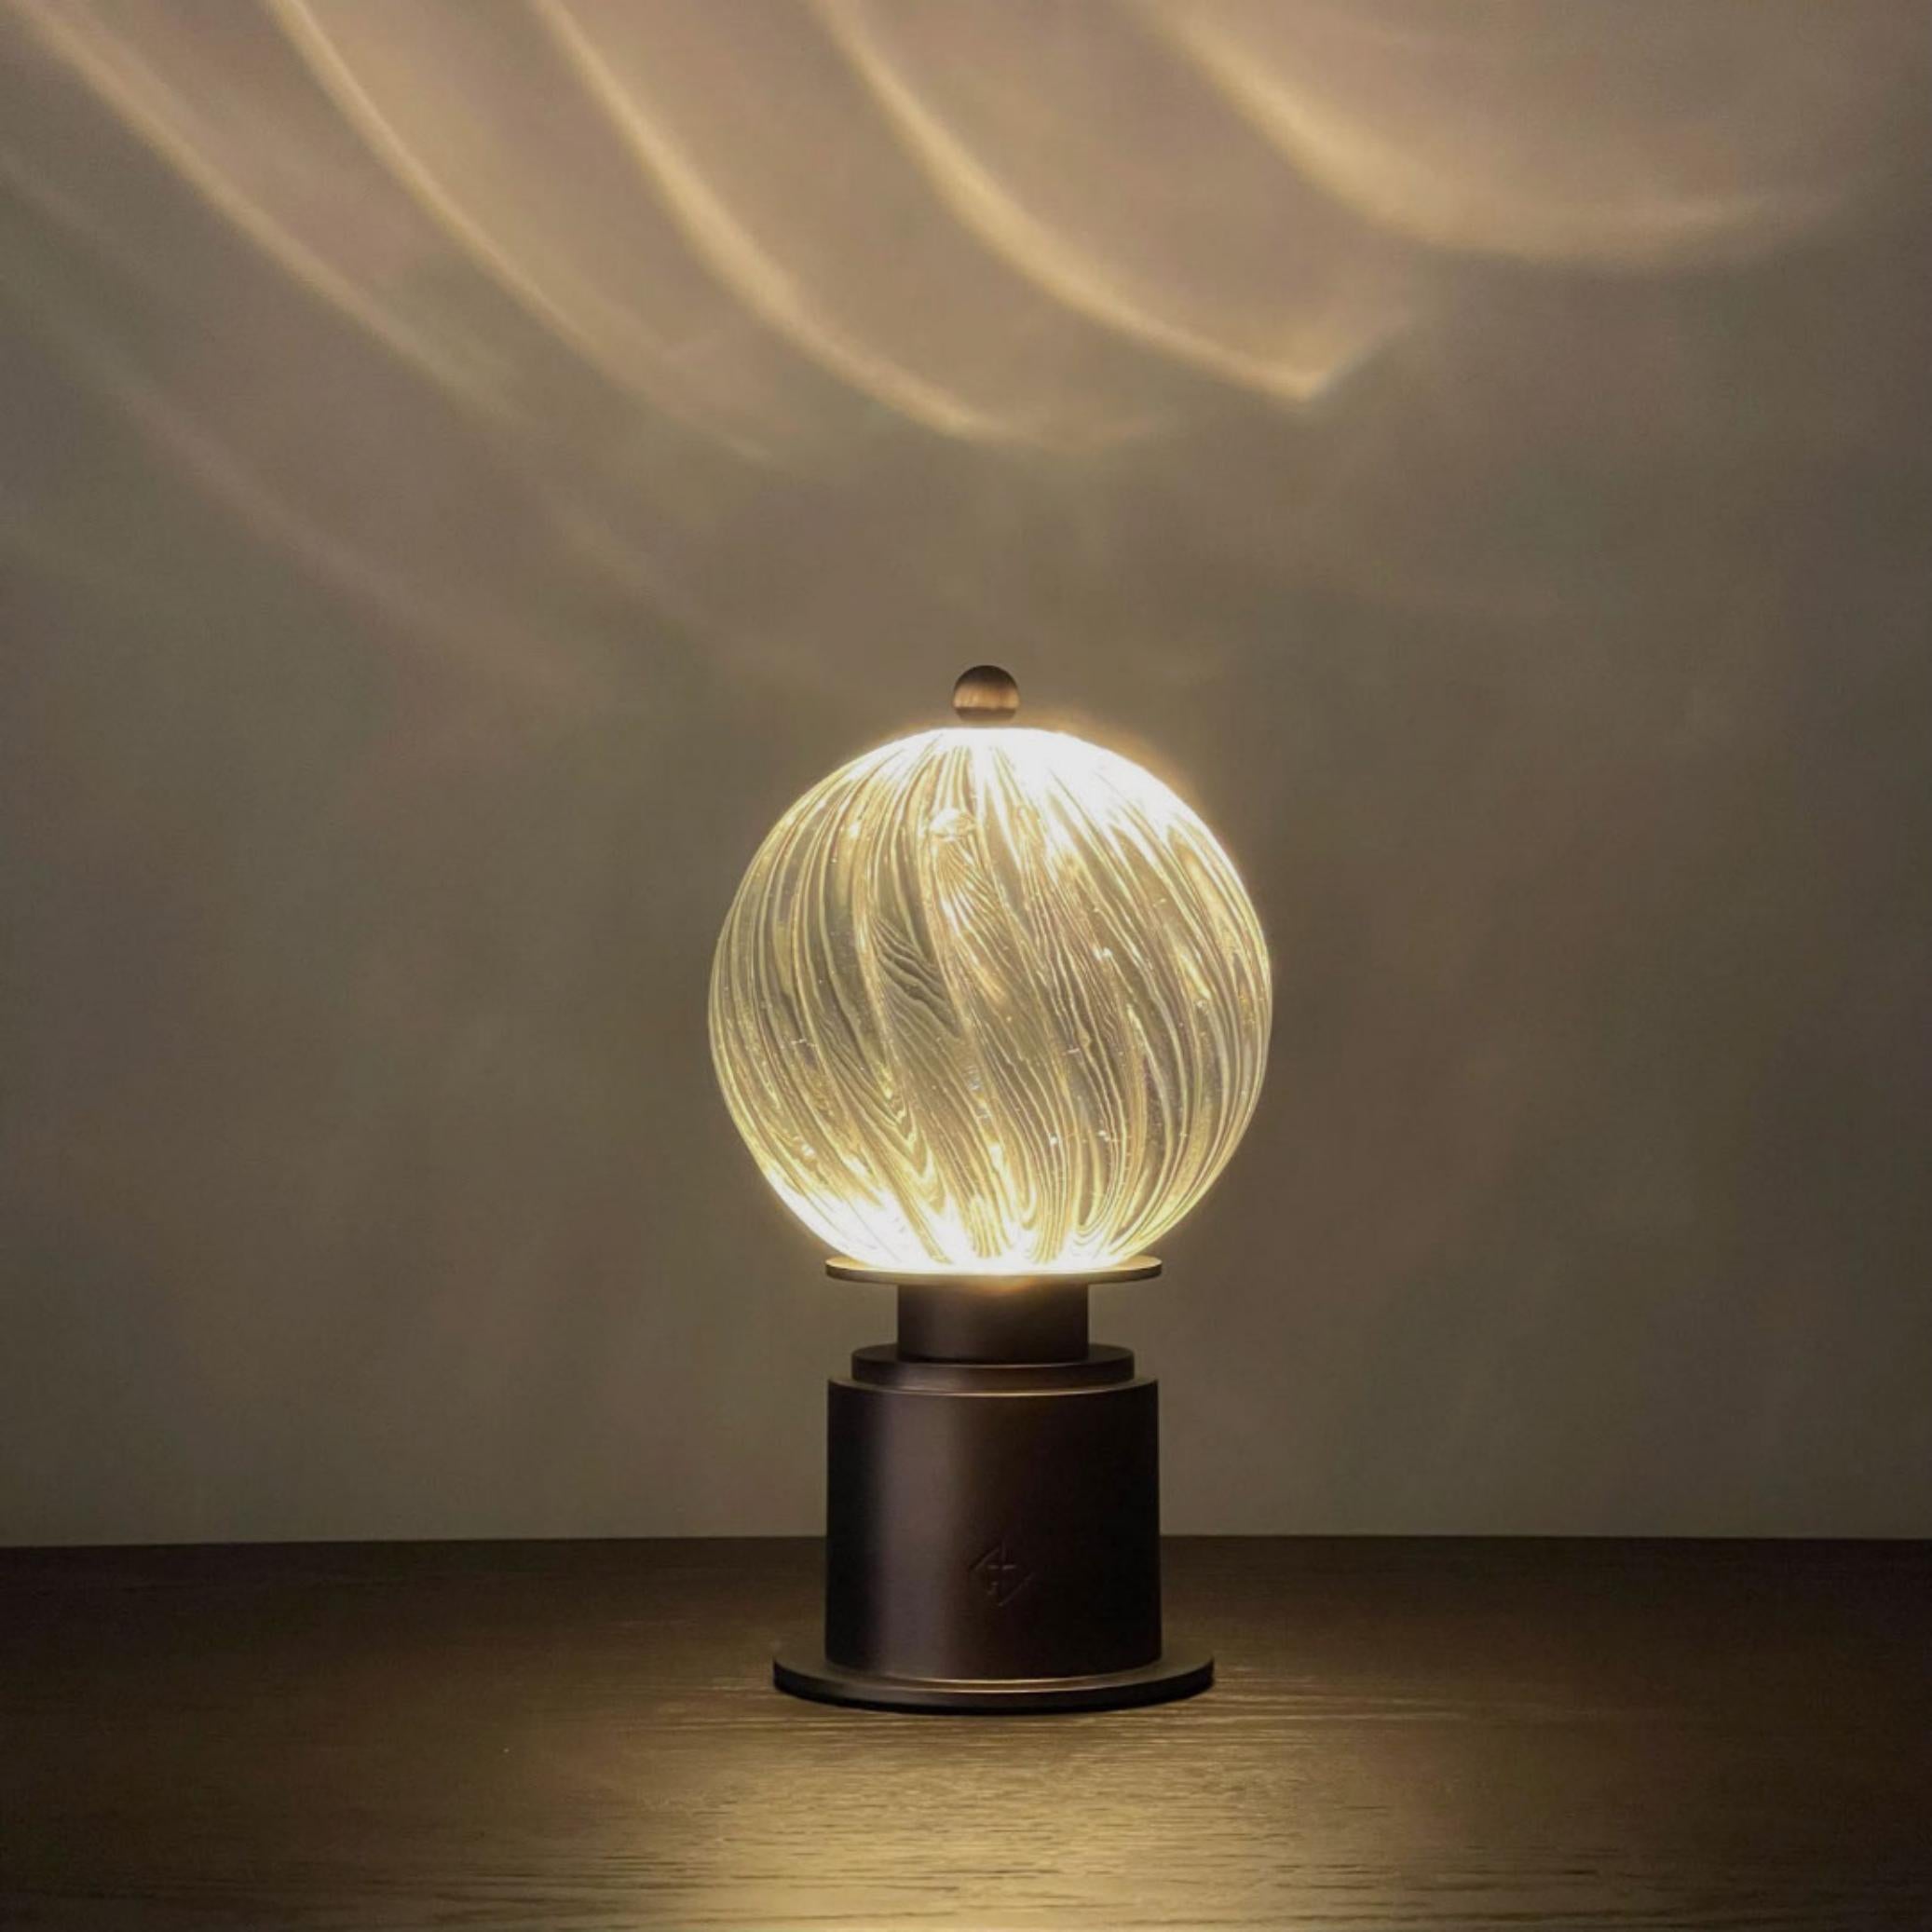 accentuate your home with the quietly-elegant lamp, created to evoke the swirling magic of a glowing globe. articulated with a solid glass spiral sphere and an anodized bronze base, the lamp is designed to accentuate your home with a sensuous